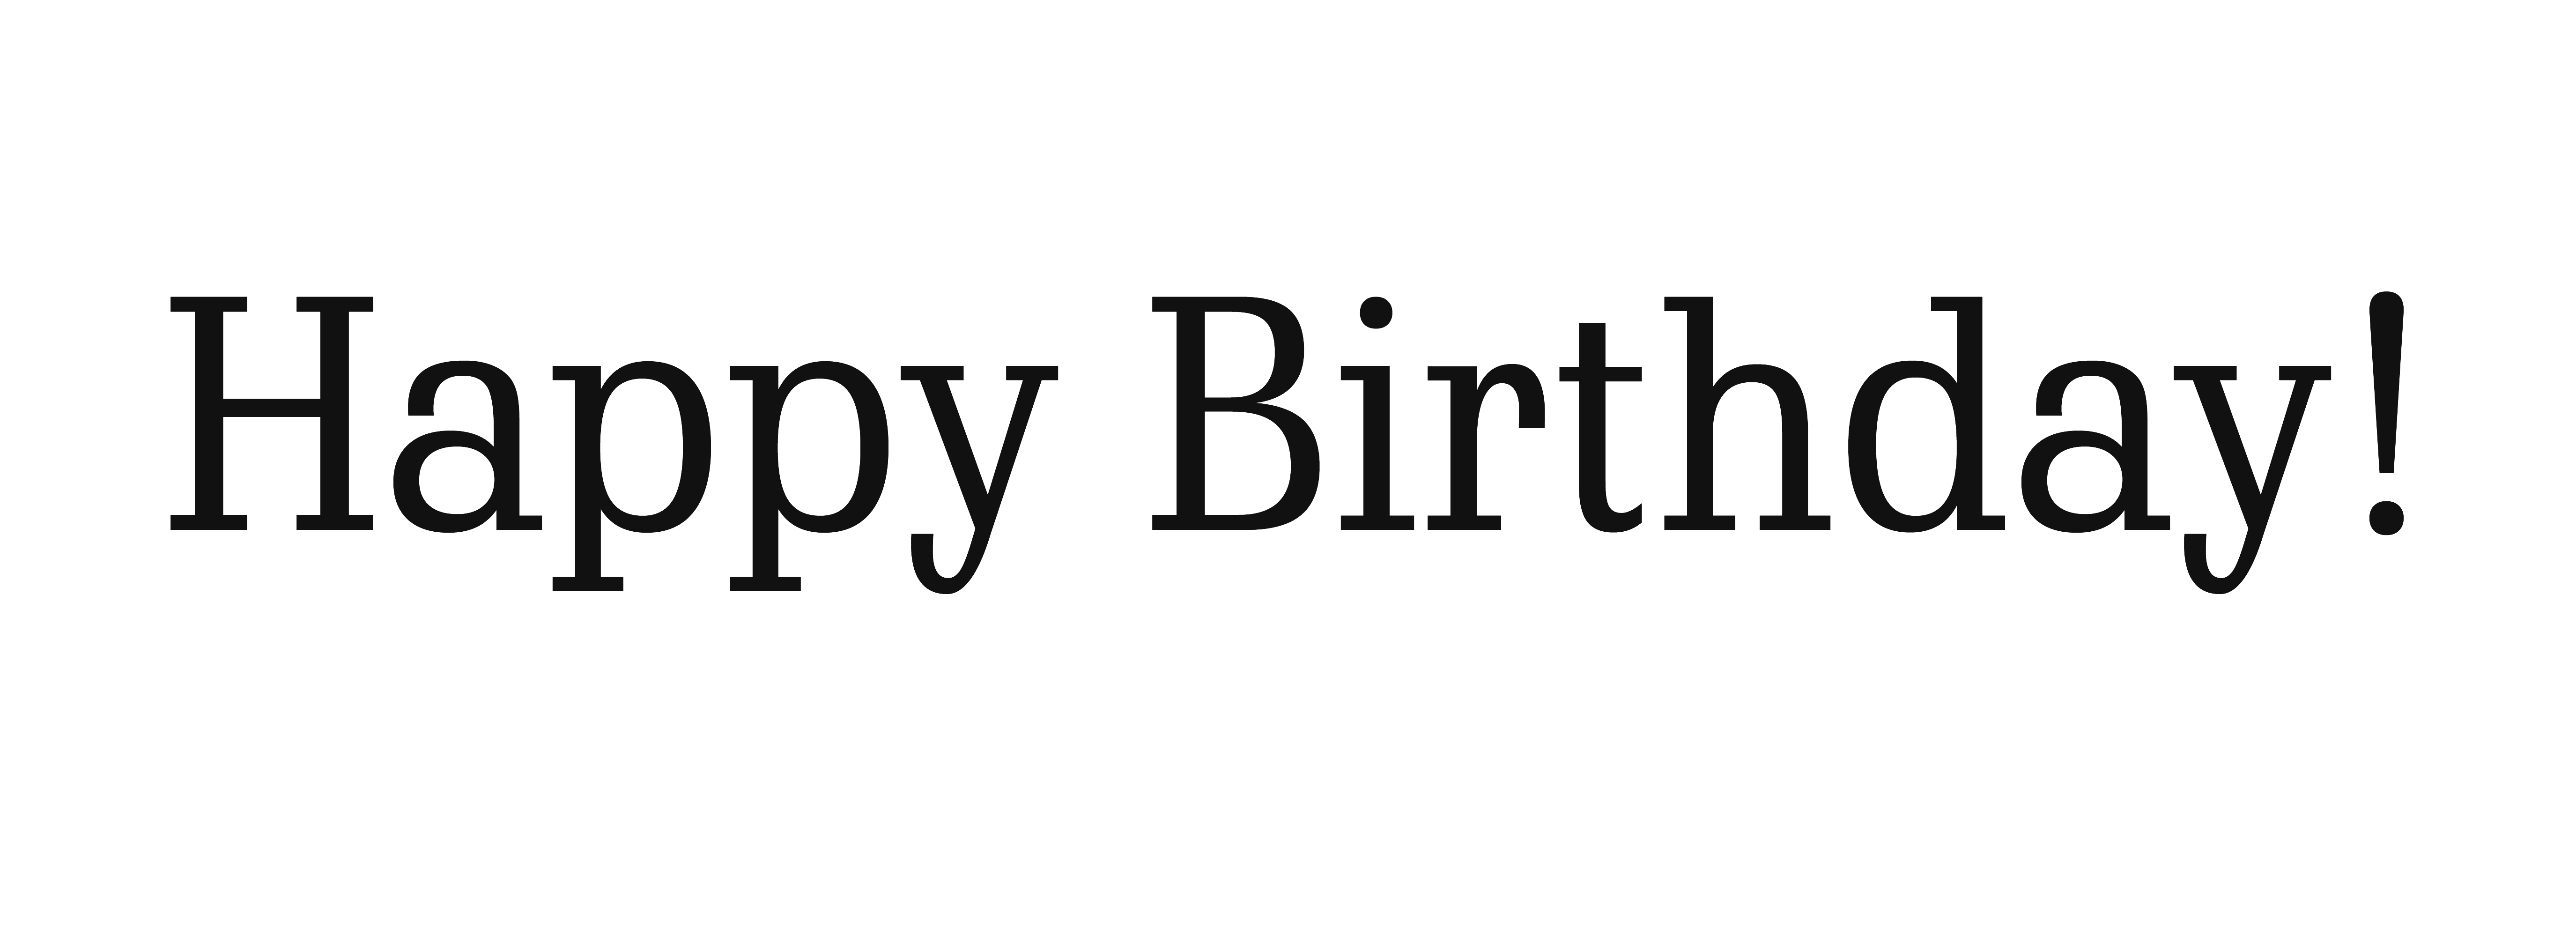 clipart-birthday-black-and-white-clipart-birthday-black-and-white